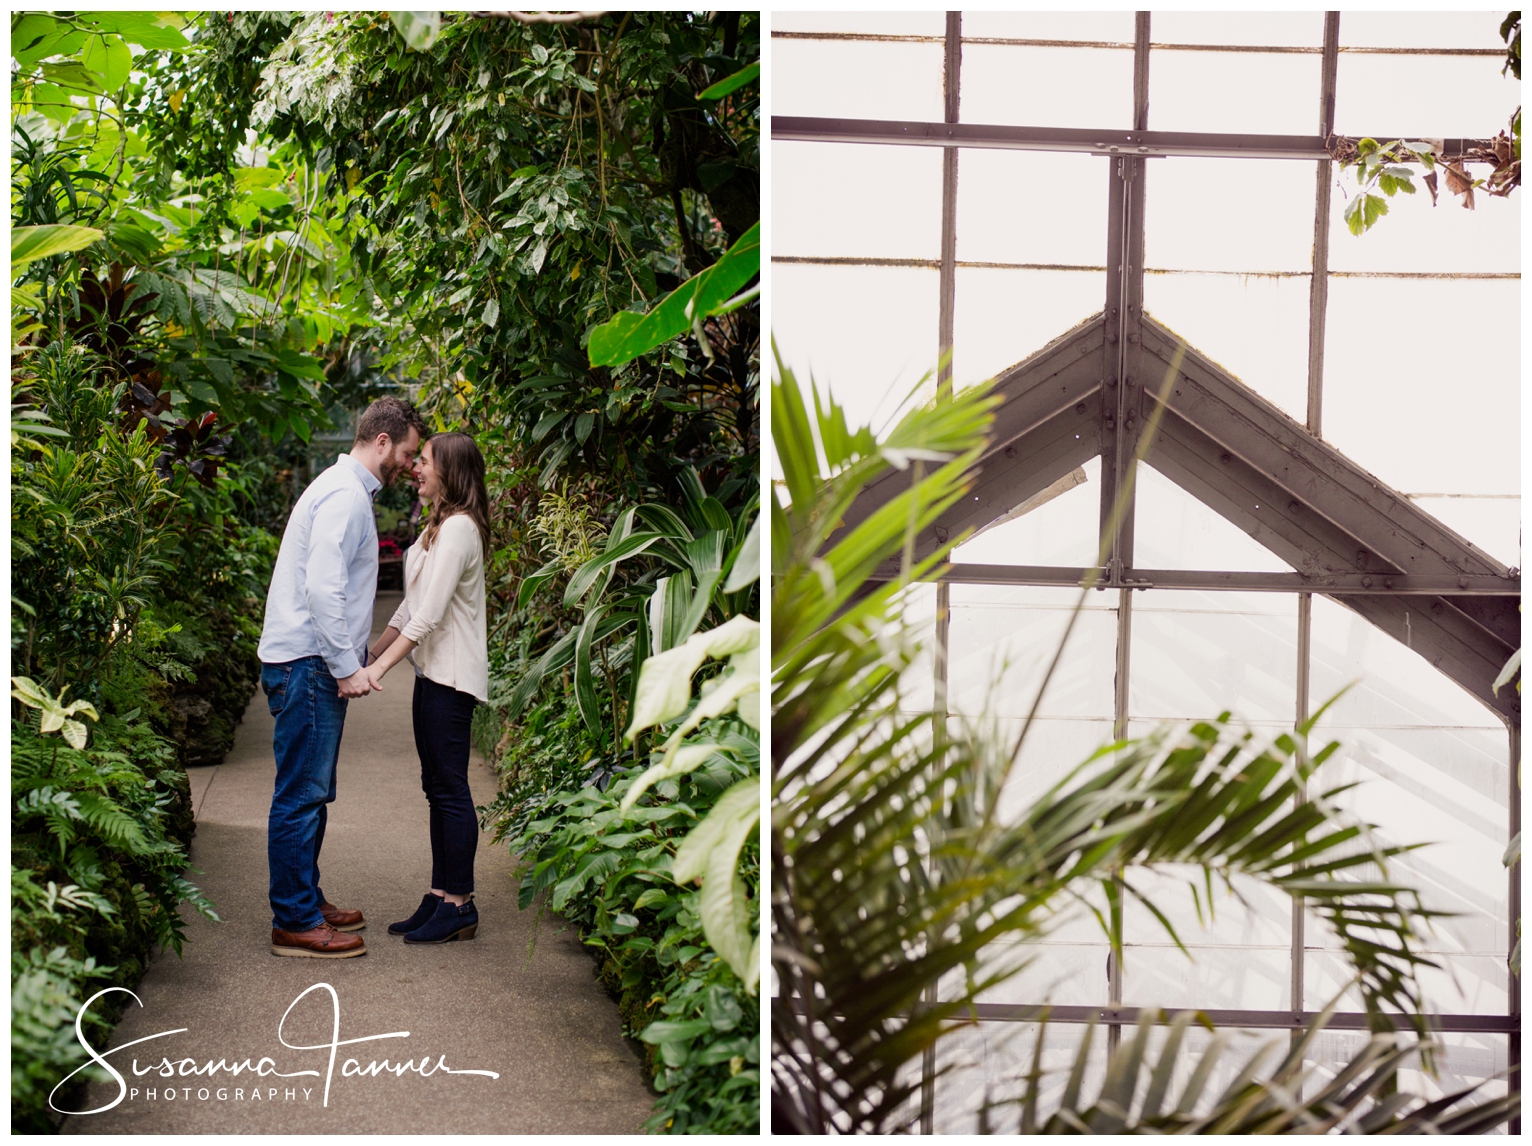 Cincinnati Krohn Conservatory Engagement Photography, photo on left, couple face each other, hold hands and stand forehead to forehead. Photo on right shows architectural elements of greenhouse